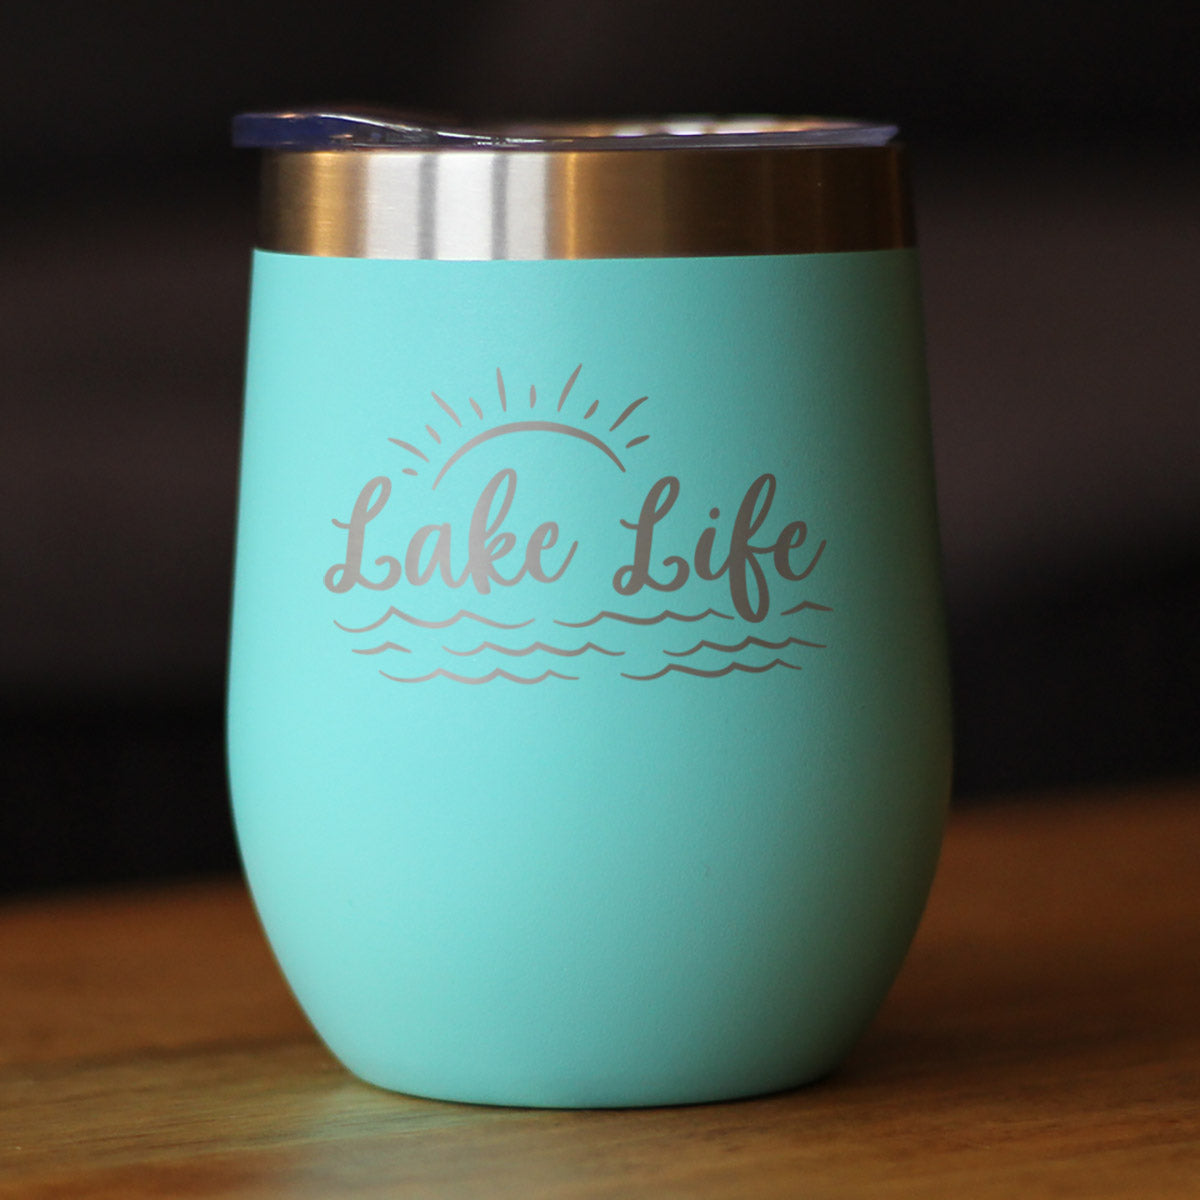 Lake Life - Wine Tumbler with Sliding Lid - Stemless Stainless Steel Insulated Cup - Cute Outdoor Camping Mug